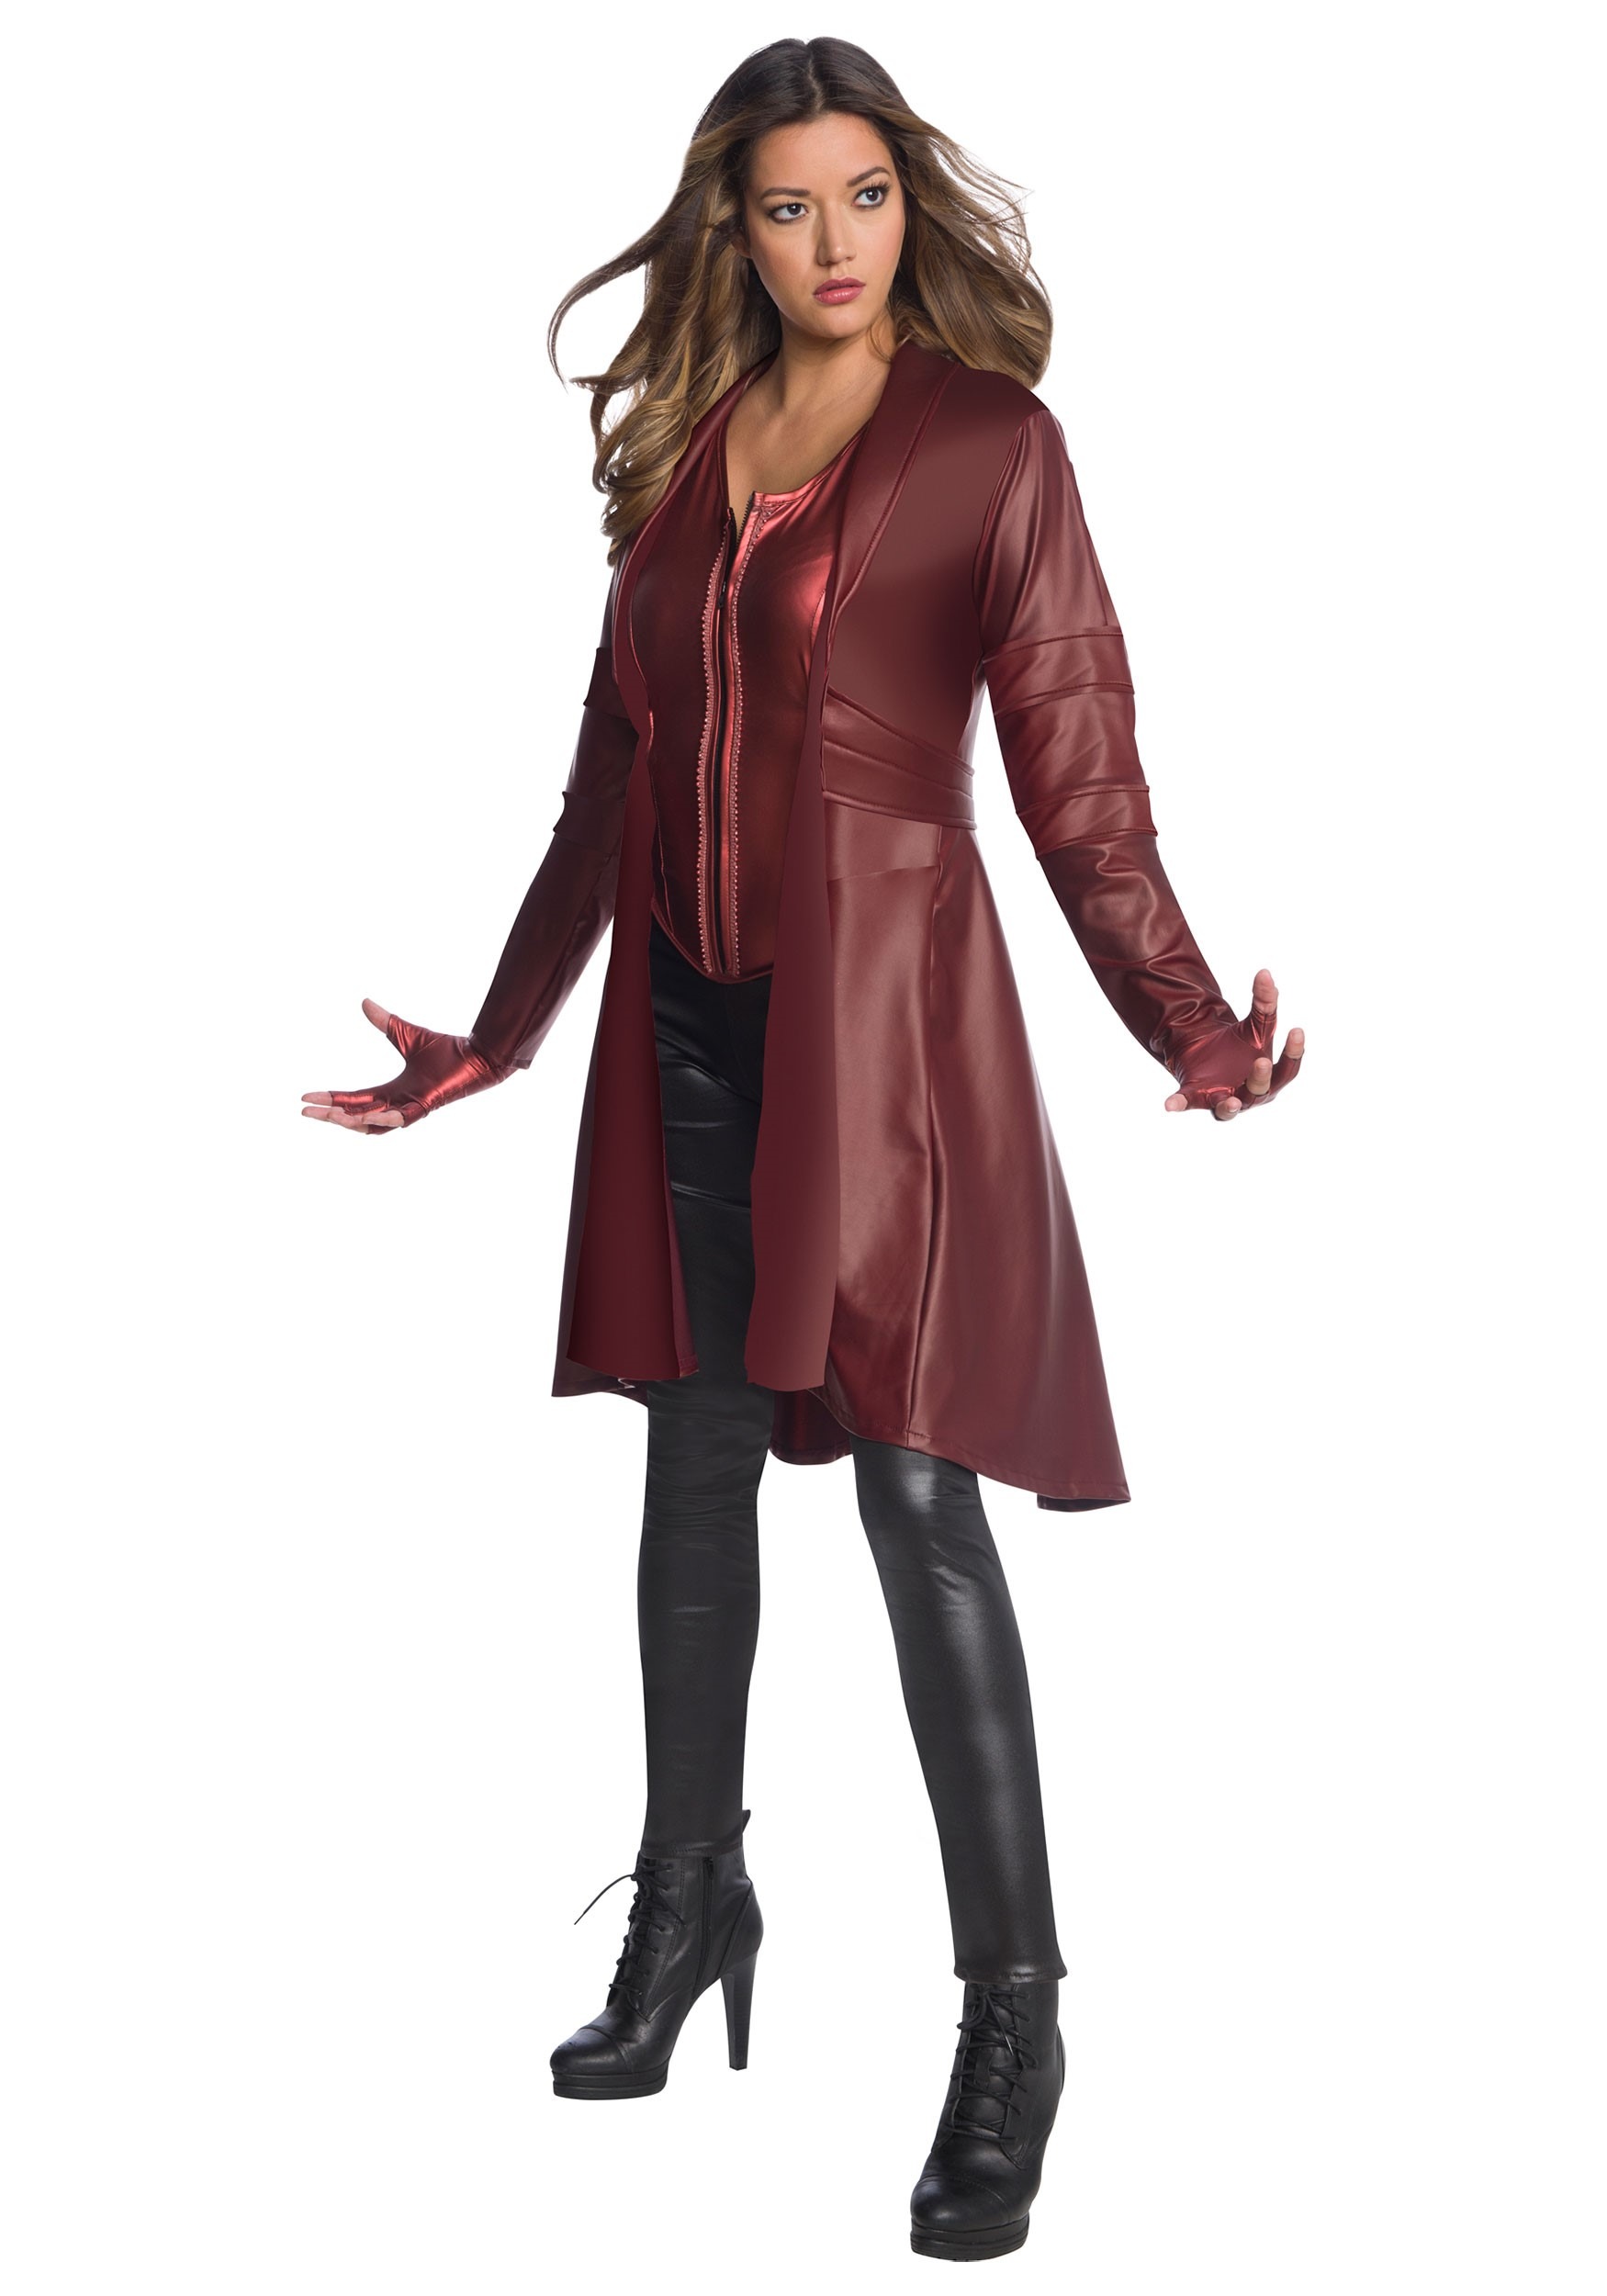 21.) Avengers Endgame Secret Wishes Scarlet Witch Women's Costume